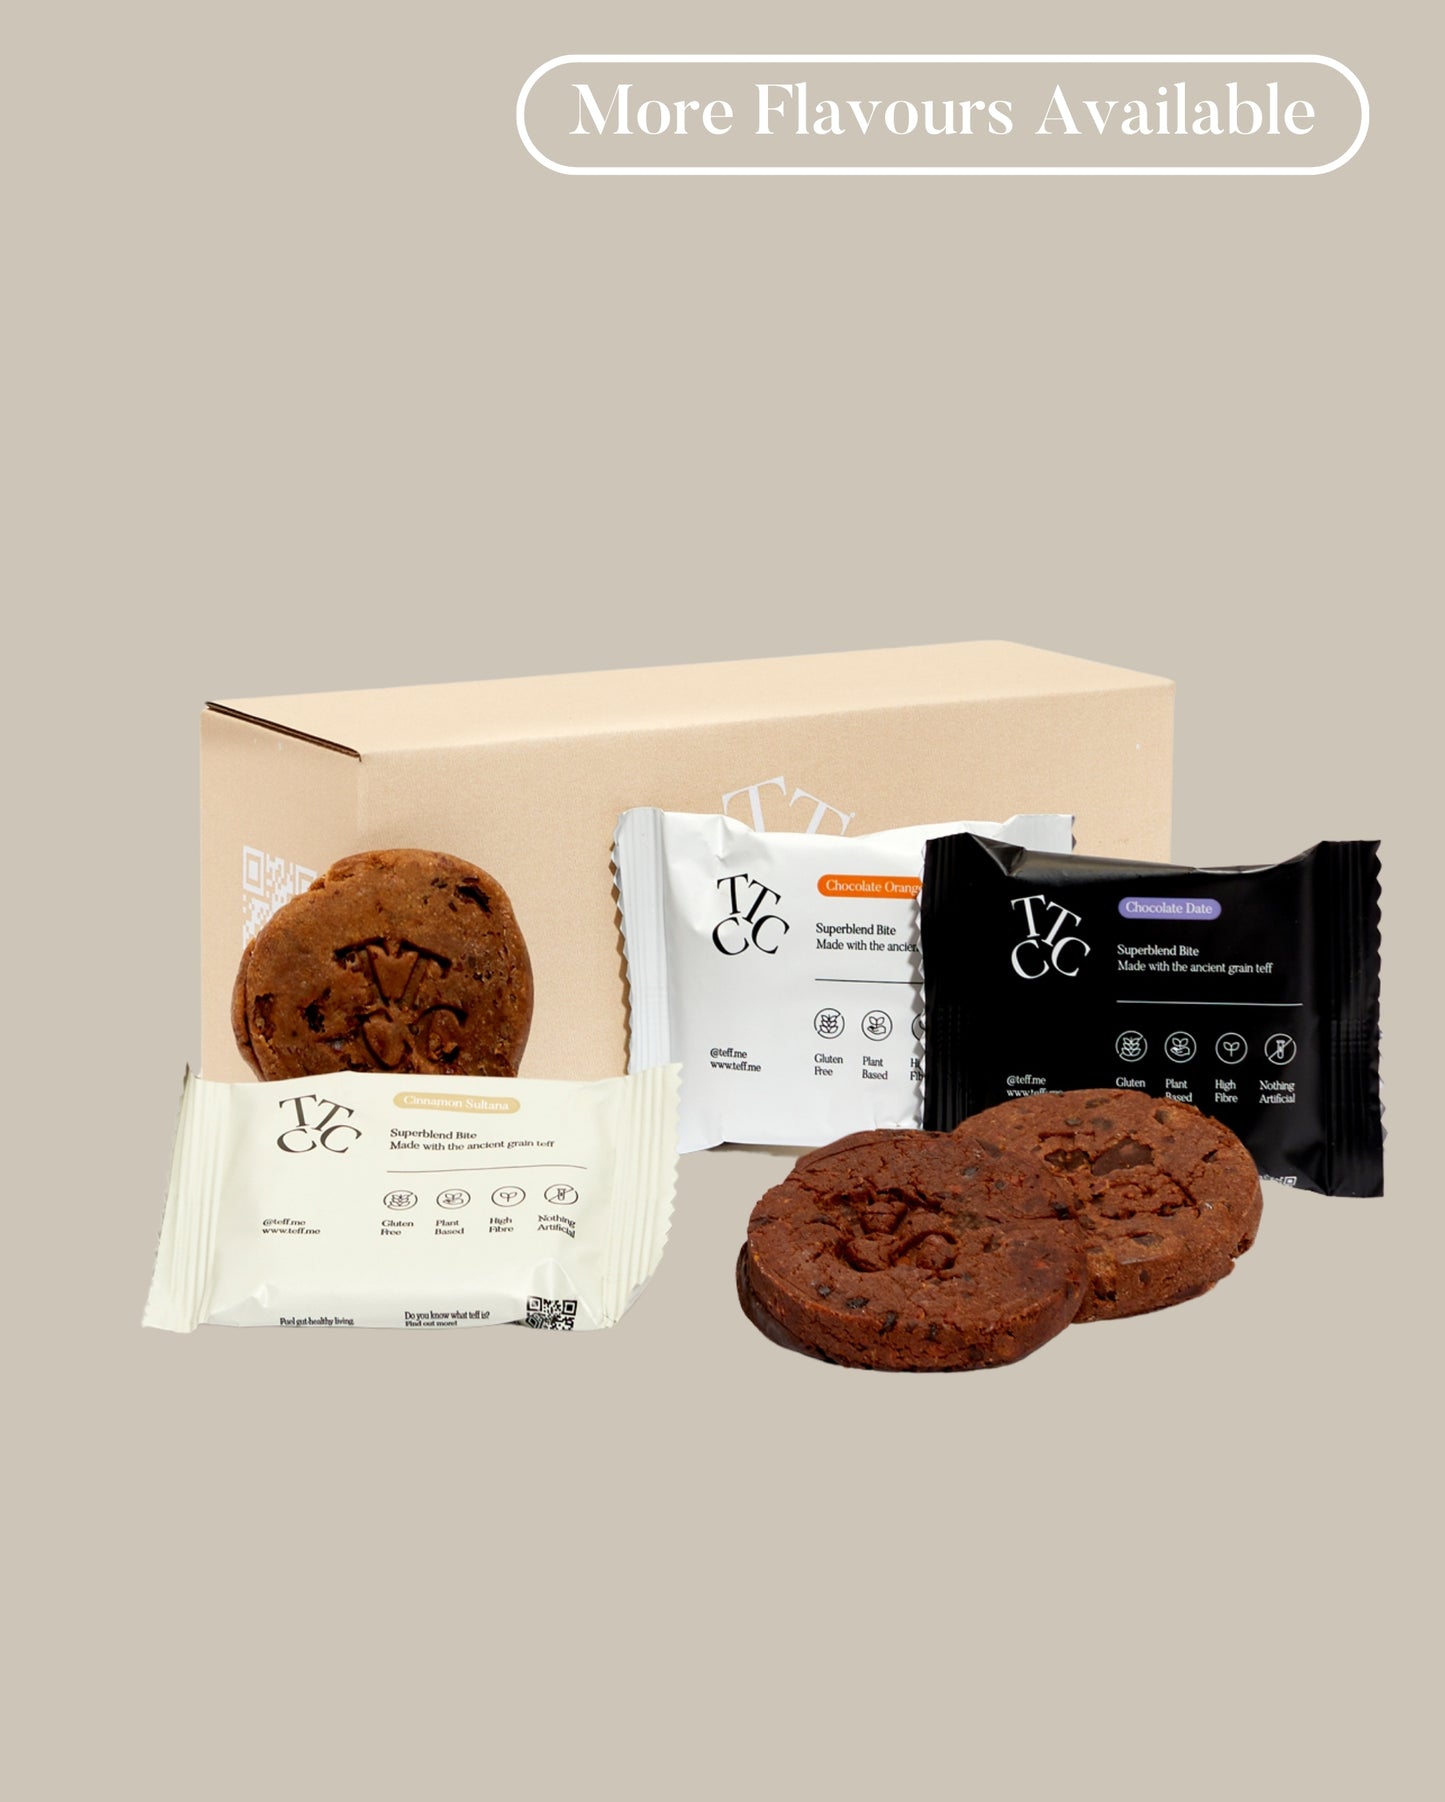 Teff superblend bite taster box with chocolate orange, chocolate date, and cinnamon sultana cookie flavours